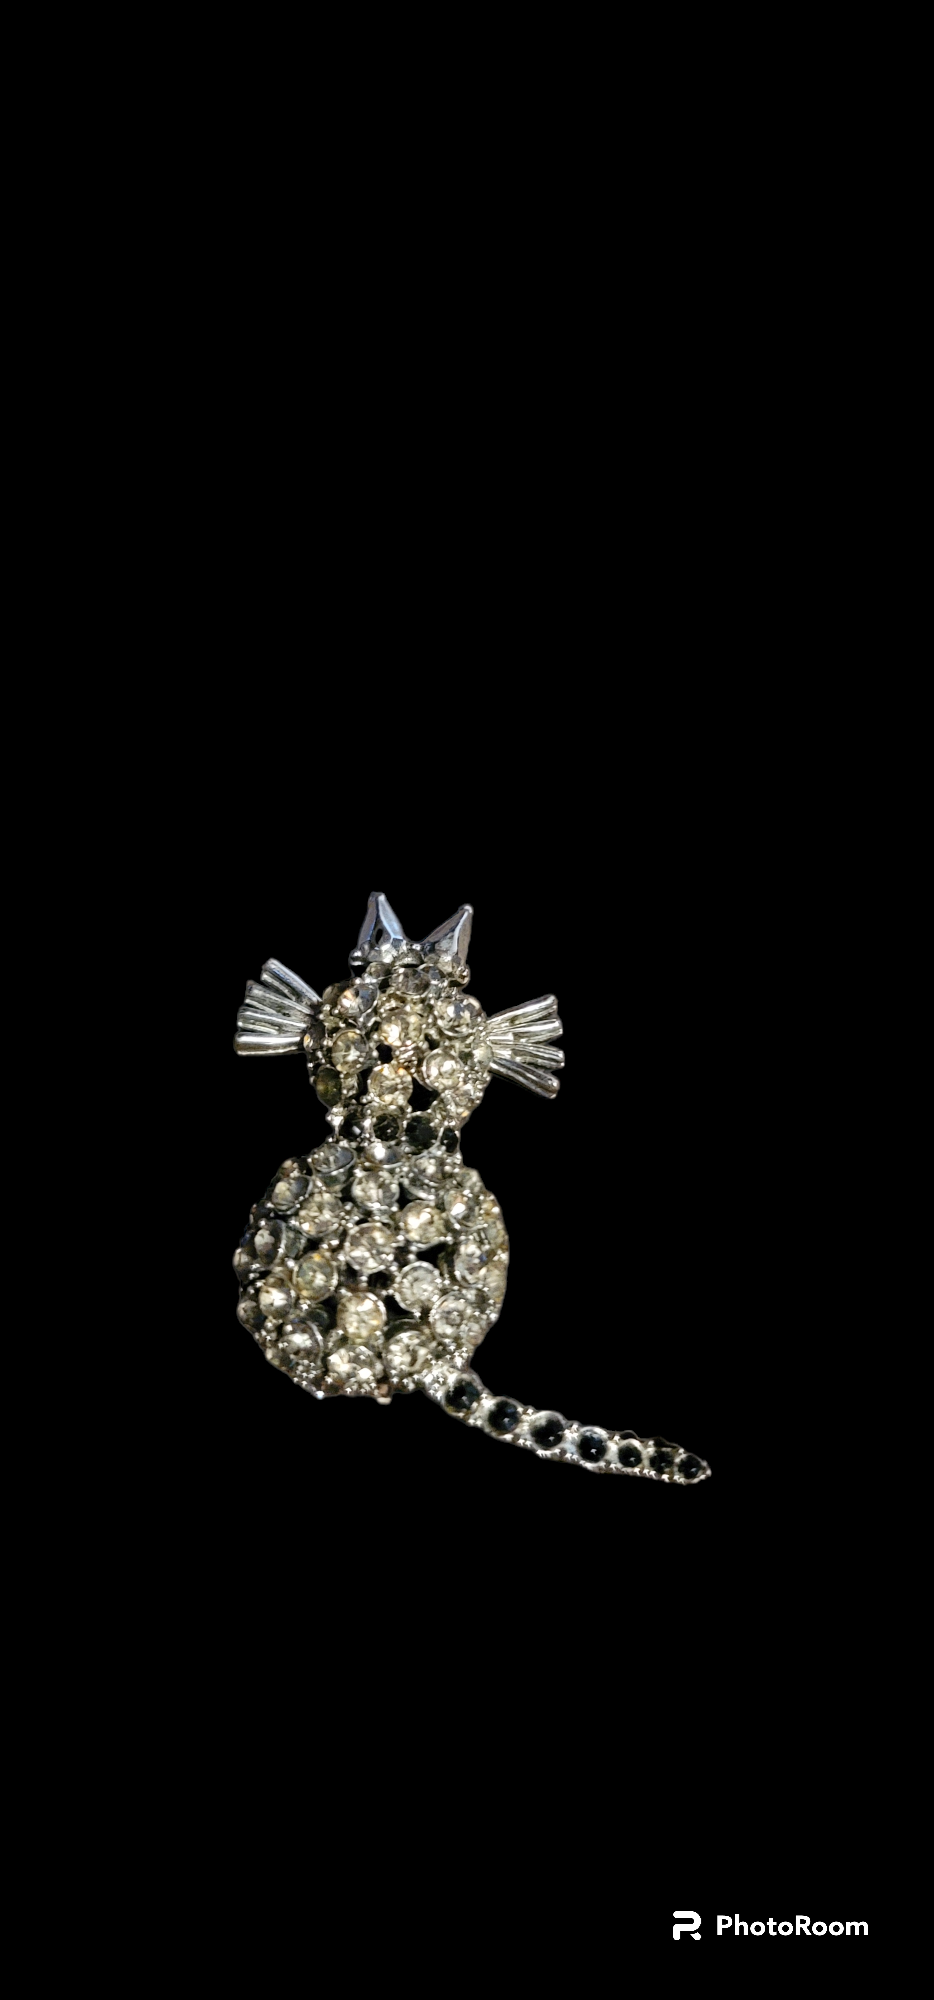 Collectable cat lapel pin